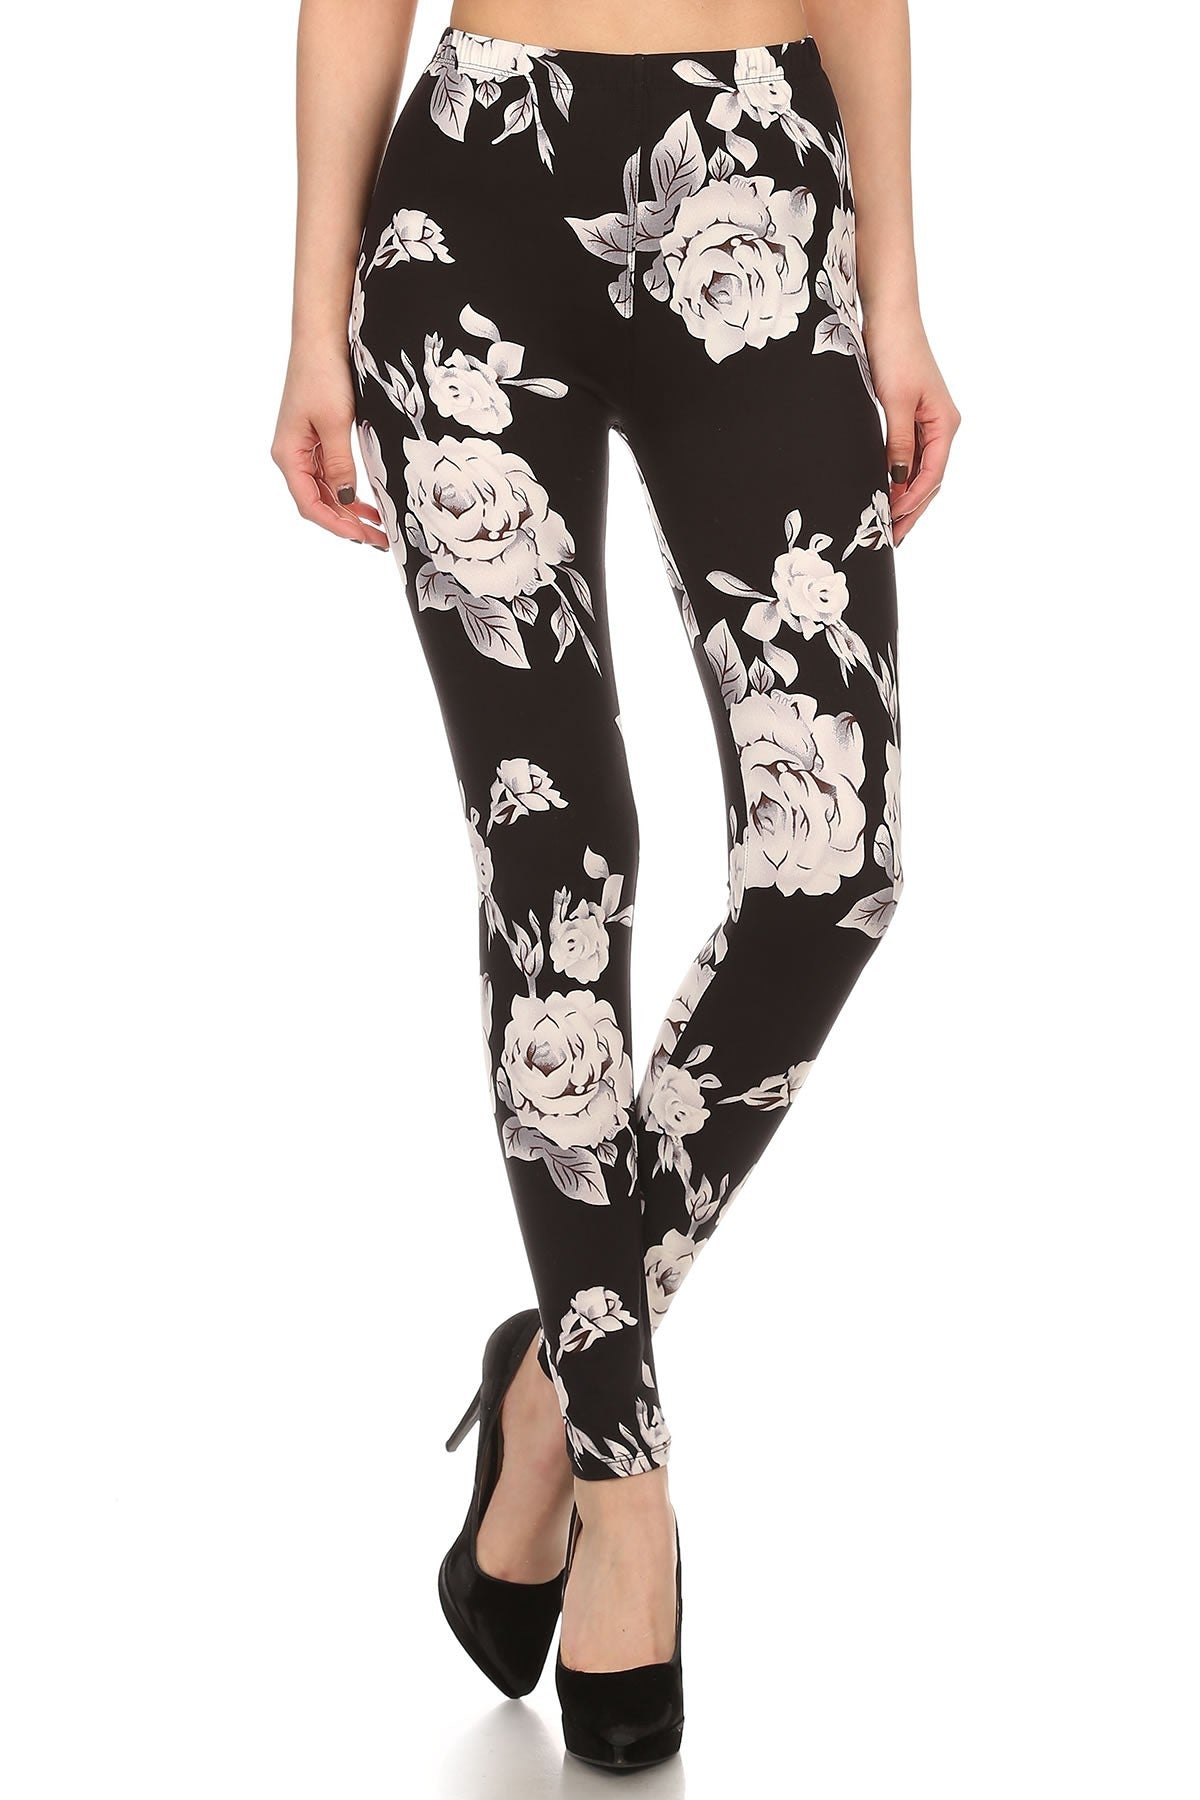 White rose flower black jagging's Womens best leggings BUTTERY SOFT LE –  Tack-M-Up Stables